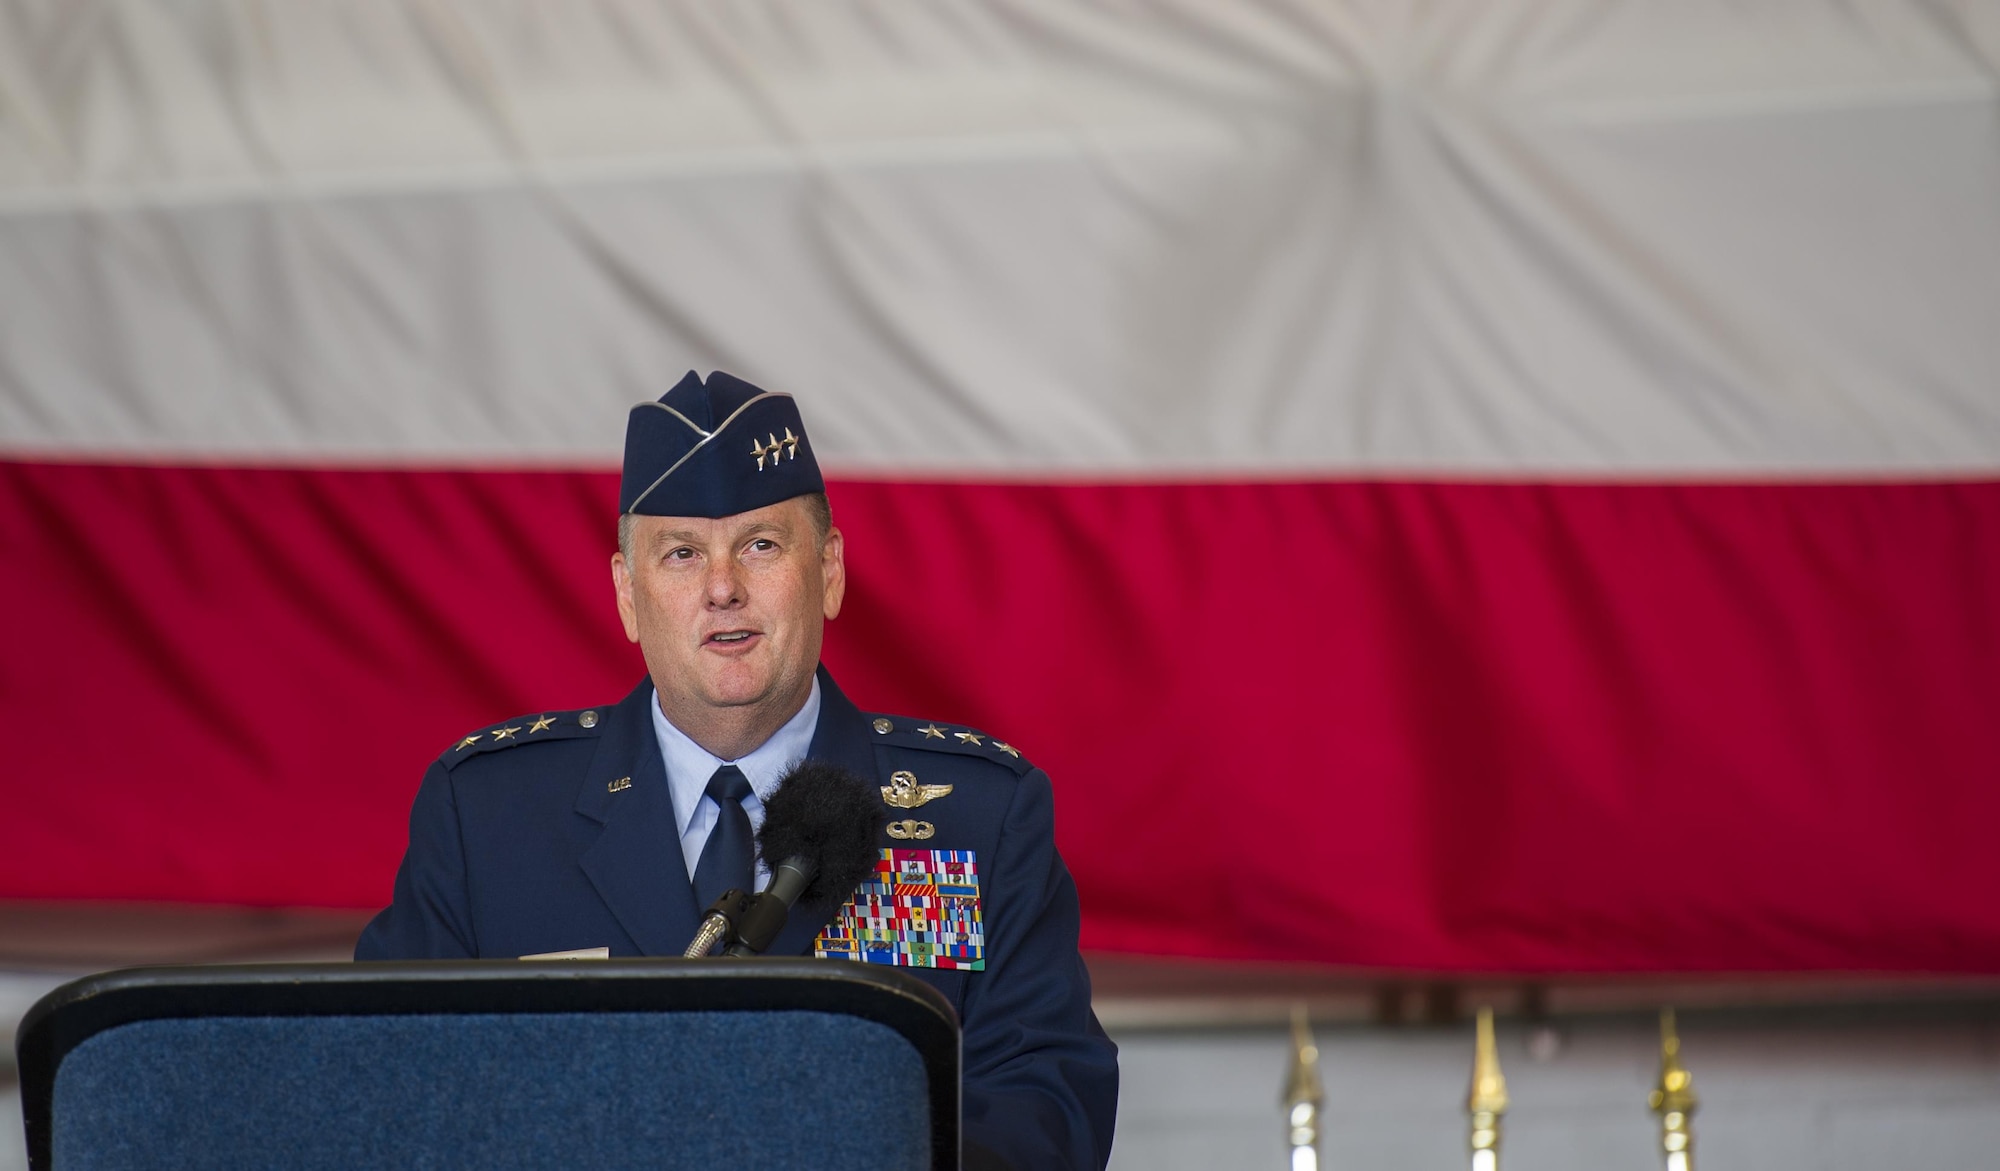 Lt. Gen. Brad Webb, the commander of Air Force Special Operations Command, speaks during the 492nd Special Operations Wing activation ceremony at Hurlburt Field, May 10, 2017. The Air Force Special Operations Air Warfare Center was inactivated and the 492nd Special Operations Wing was activated. Simultaneously, the 492nd Special Operations Group and the 492nd Special Operations Training Group were activated under the 492nd SOW.(U.S. Air Force photo by Airman 1st Class Joseph Pick)